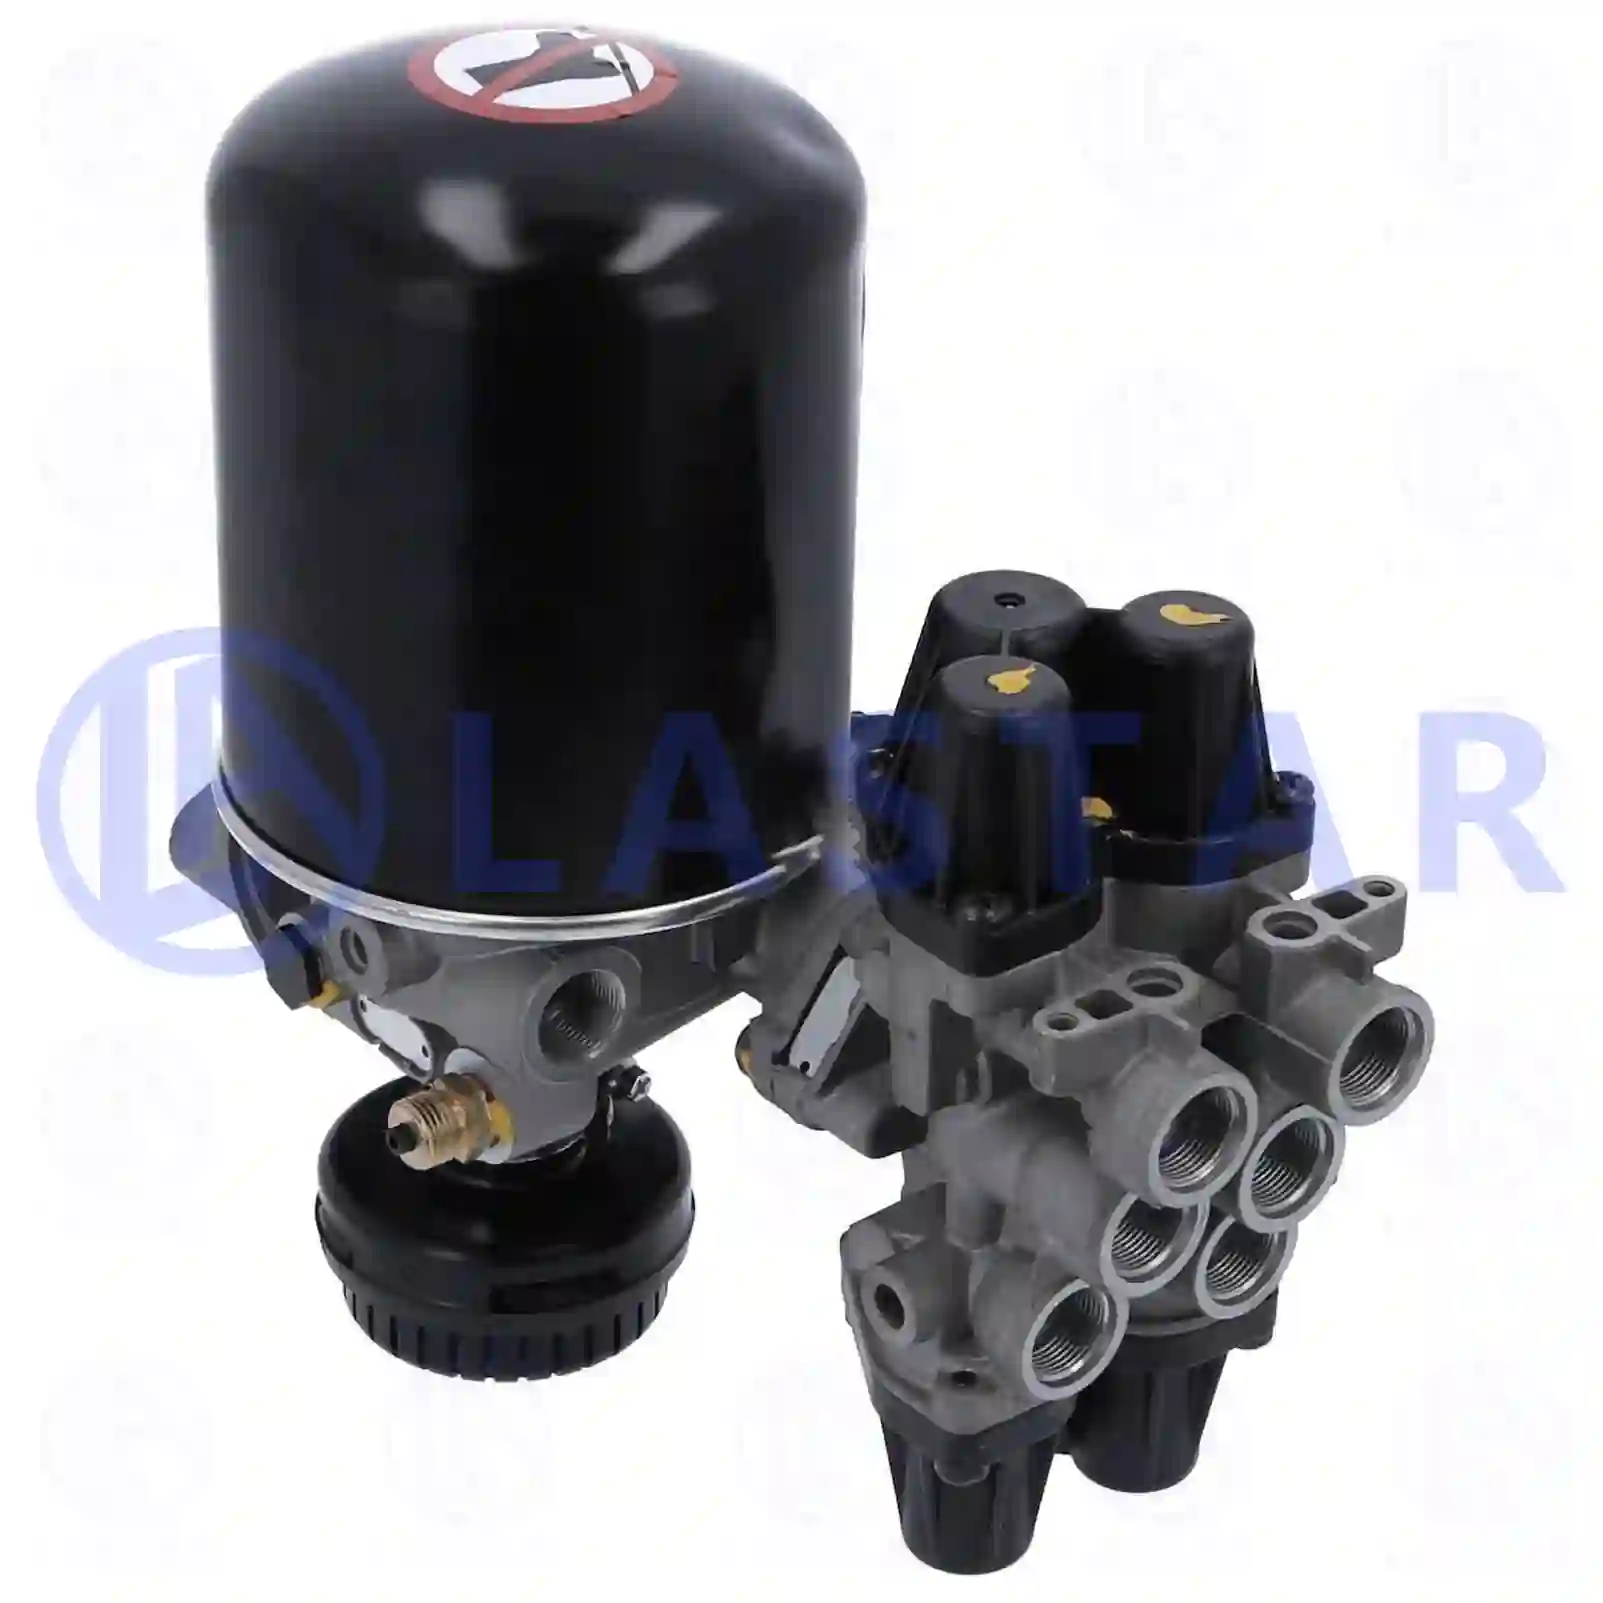 Air dryer, complete with valve, 77715126, 6934207871, 6934207971, , , , , , , , , ||  77715126 Lastar Spare Part | Truck Spare Parts, Auotomotive Spare Parts Air dryer, complete with valve, 77715126, 6934207871, 6934207971, , , , , , , , , ||  77715126 Lastar Spare Part | Truck Spare Parts, Auotomotive Spare Parts